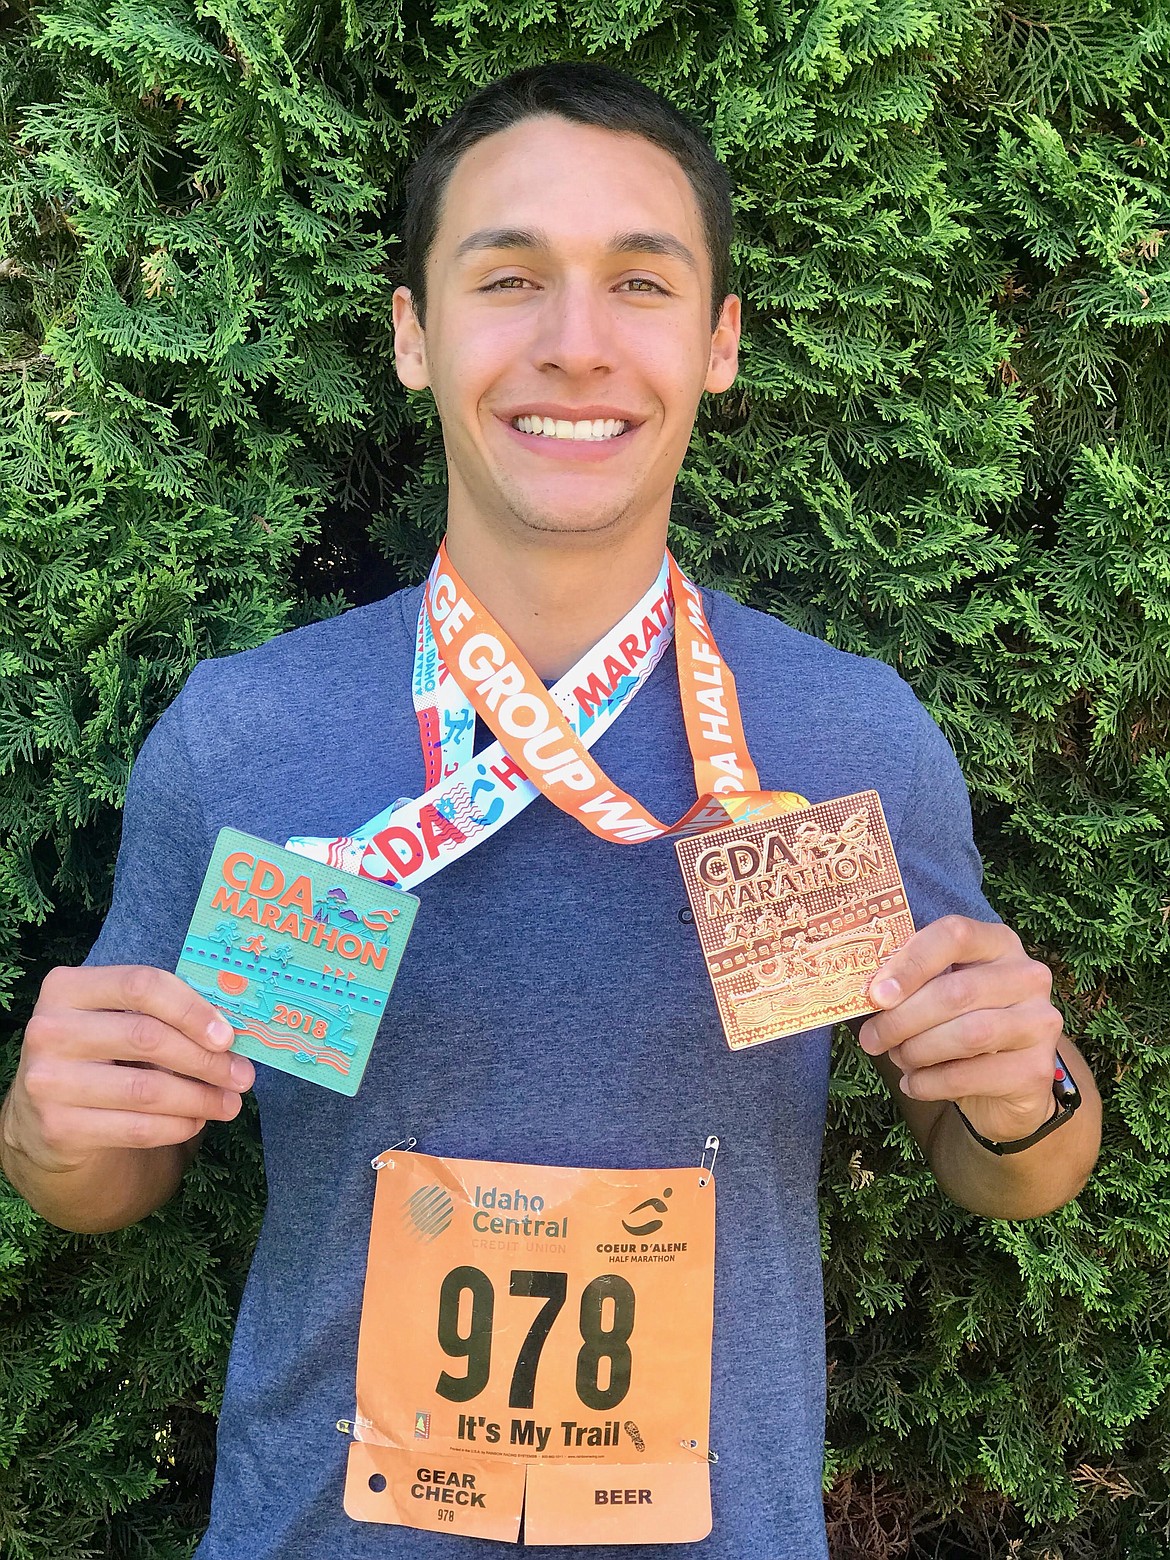 Courtesy photo
Ricky Bustillos, 18, of Coeur d&#146;Alene, has wanted to compete in an Ironman since he was young. Bustillos&#146; first Ironman will be Sunday&#146;s Coeur d&#146;Alene 70.3. He&#146;ll join athletes from all over the world to swim, bike and run for a piece of the $30,000 prize purse and the chance to advance to September&#146;s championship in South Africa.